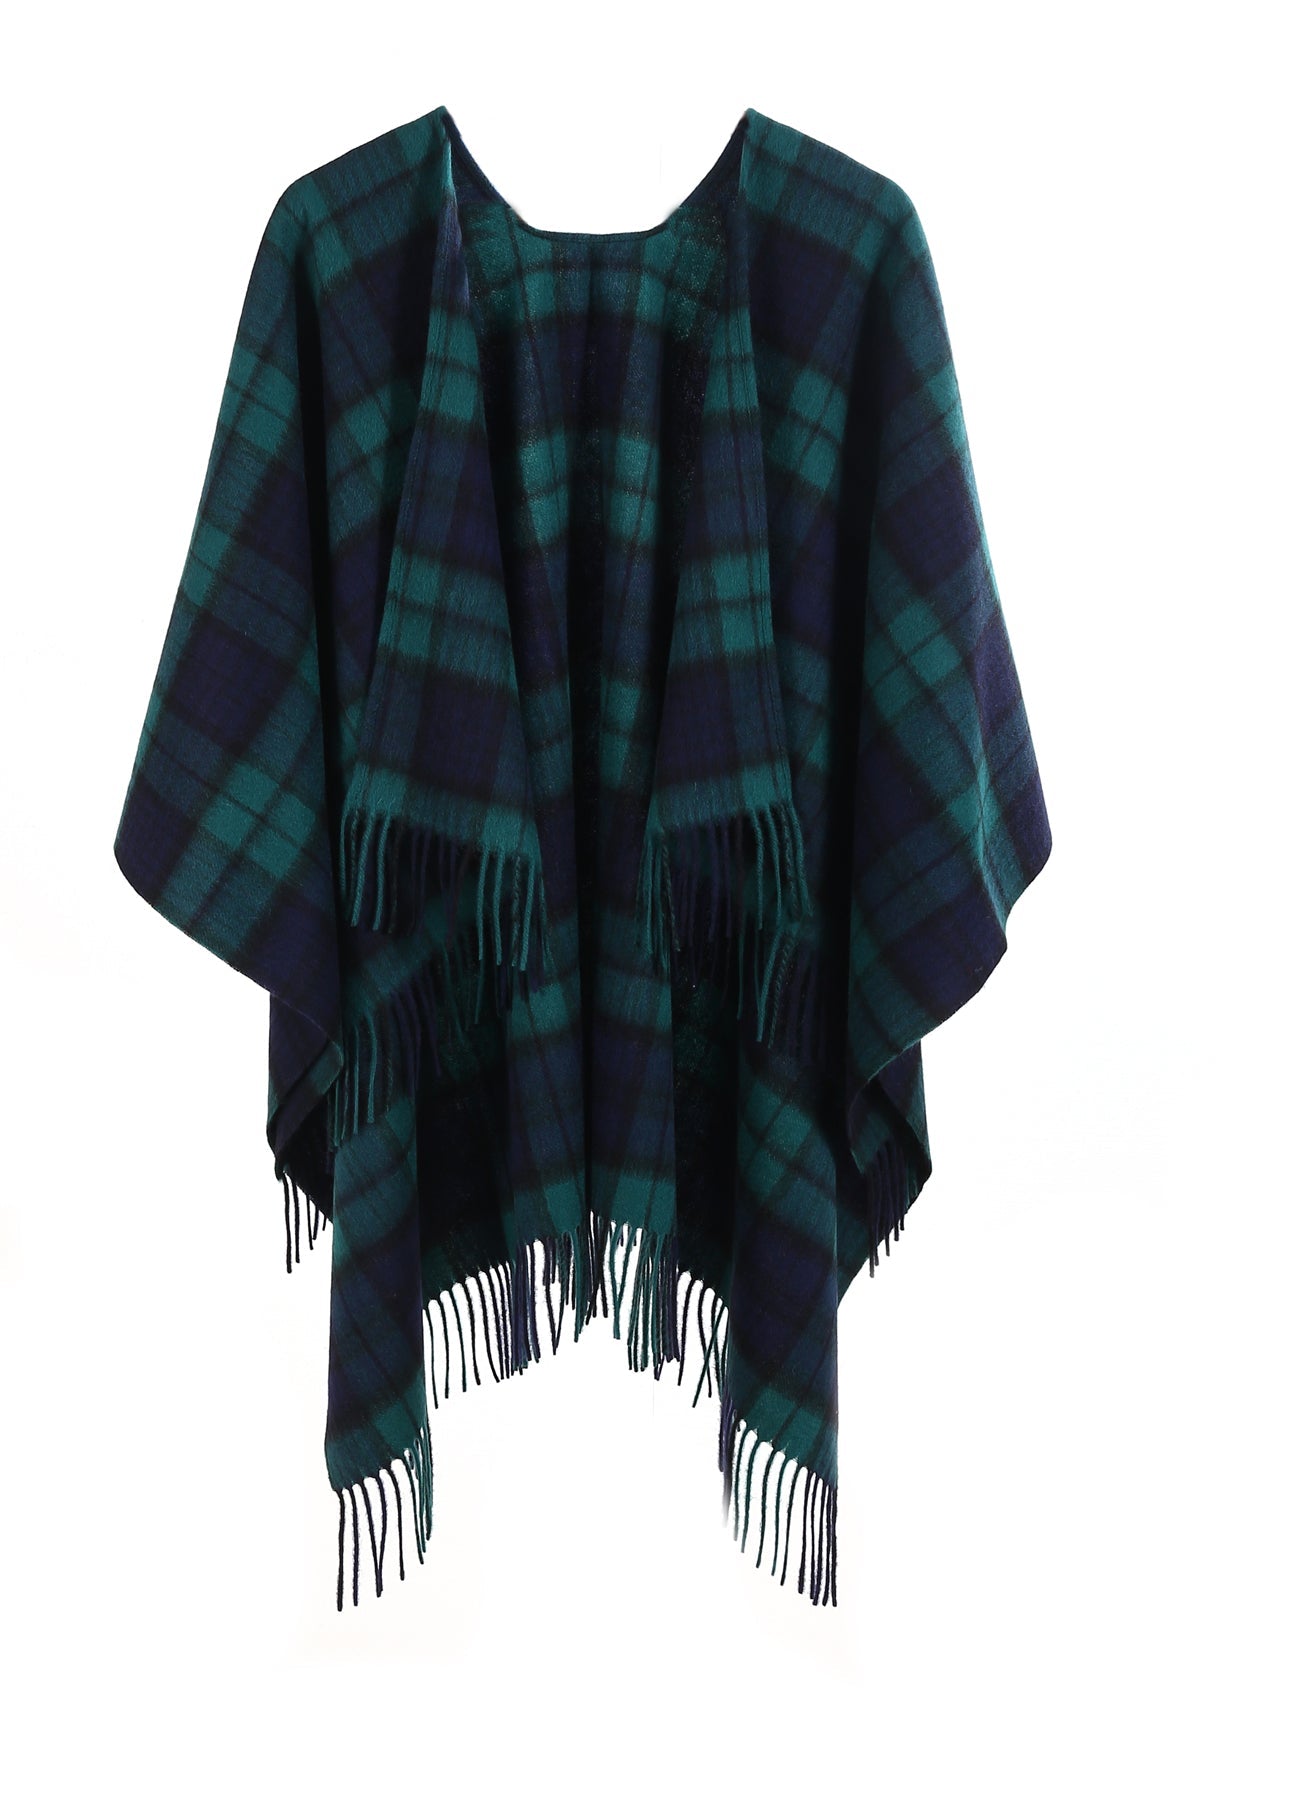 Black Watch Cape 100% Pure Lambswool